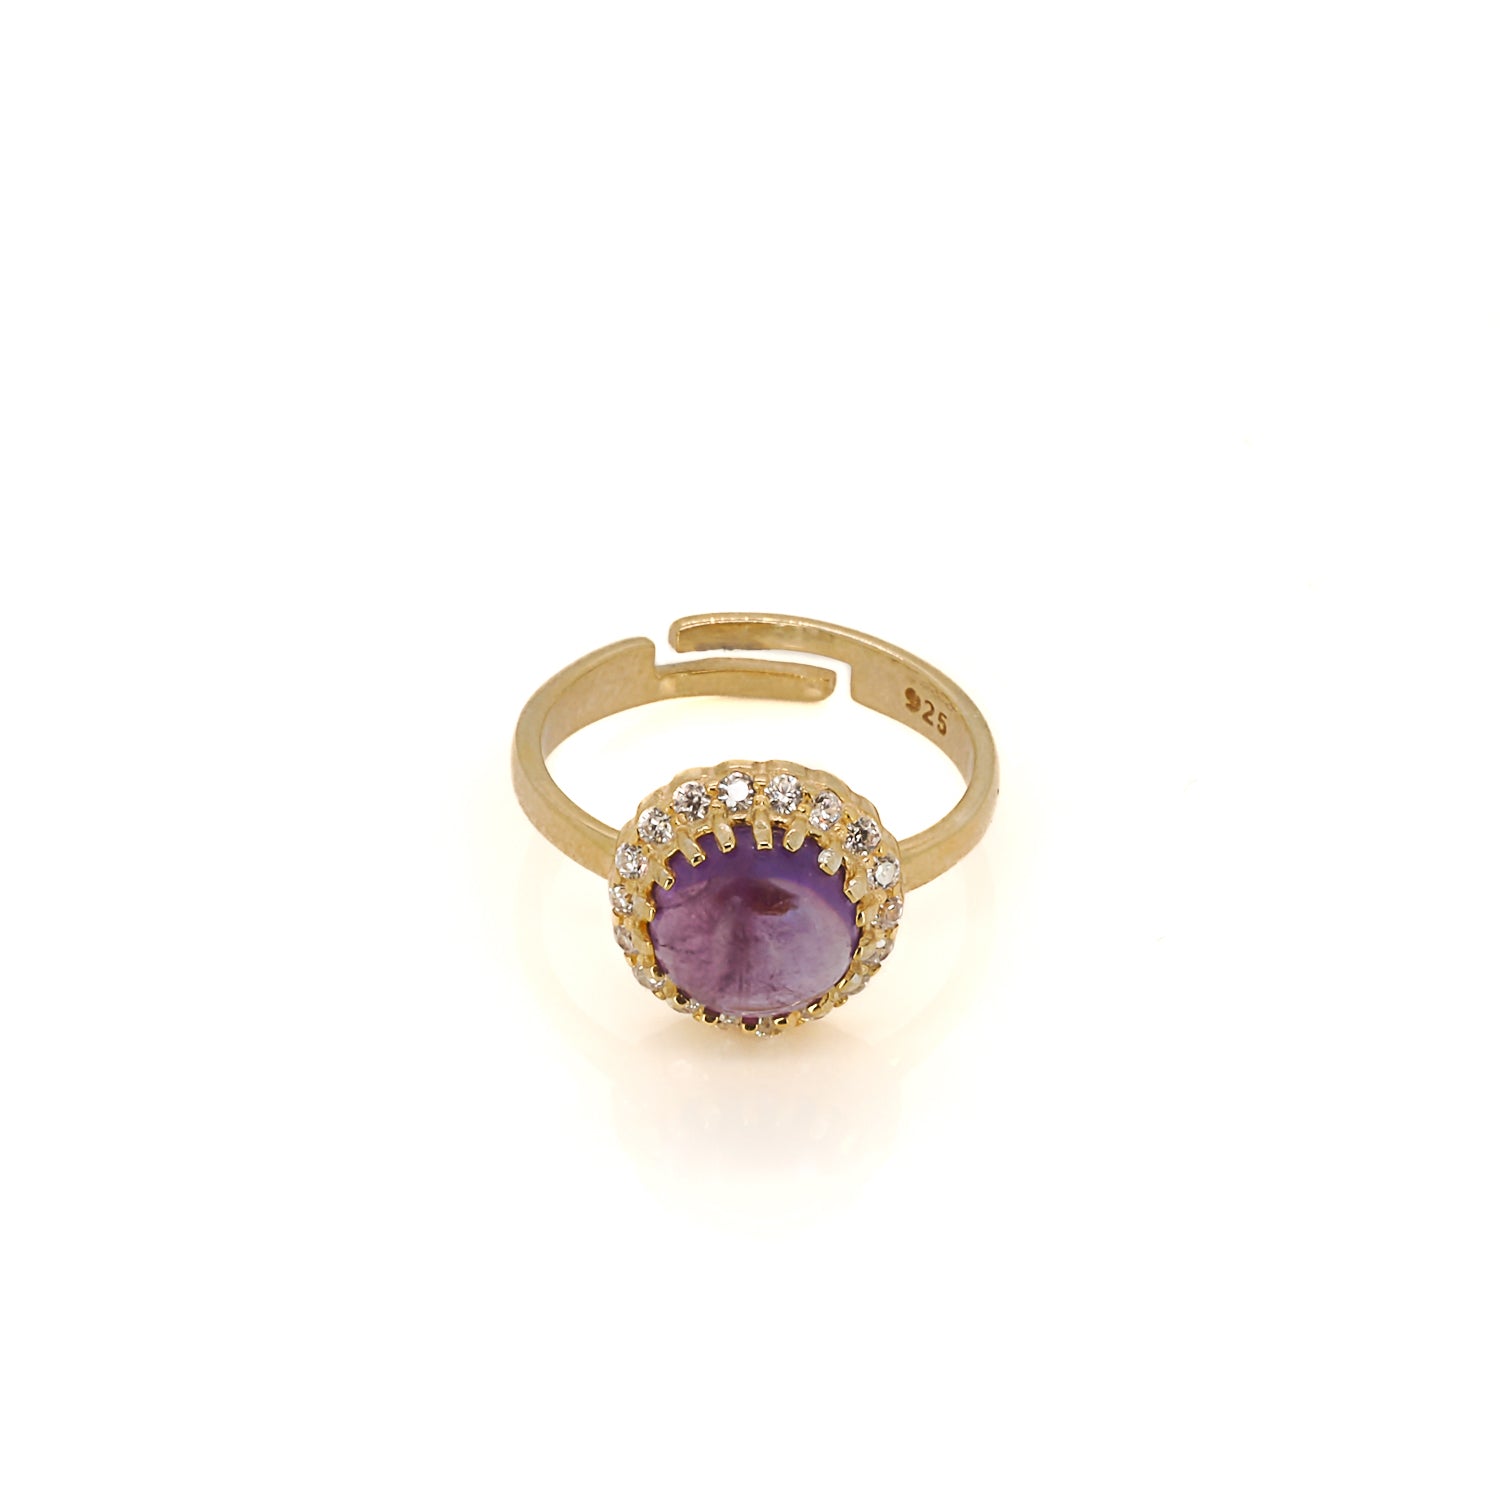 Luxurious Handmade Gold-Plated Amethyst Ring - A Symbol of Tranquility and Inner Strength.